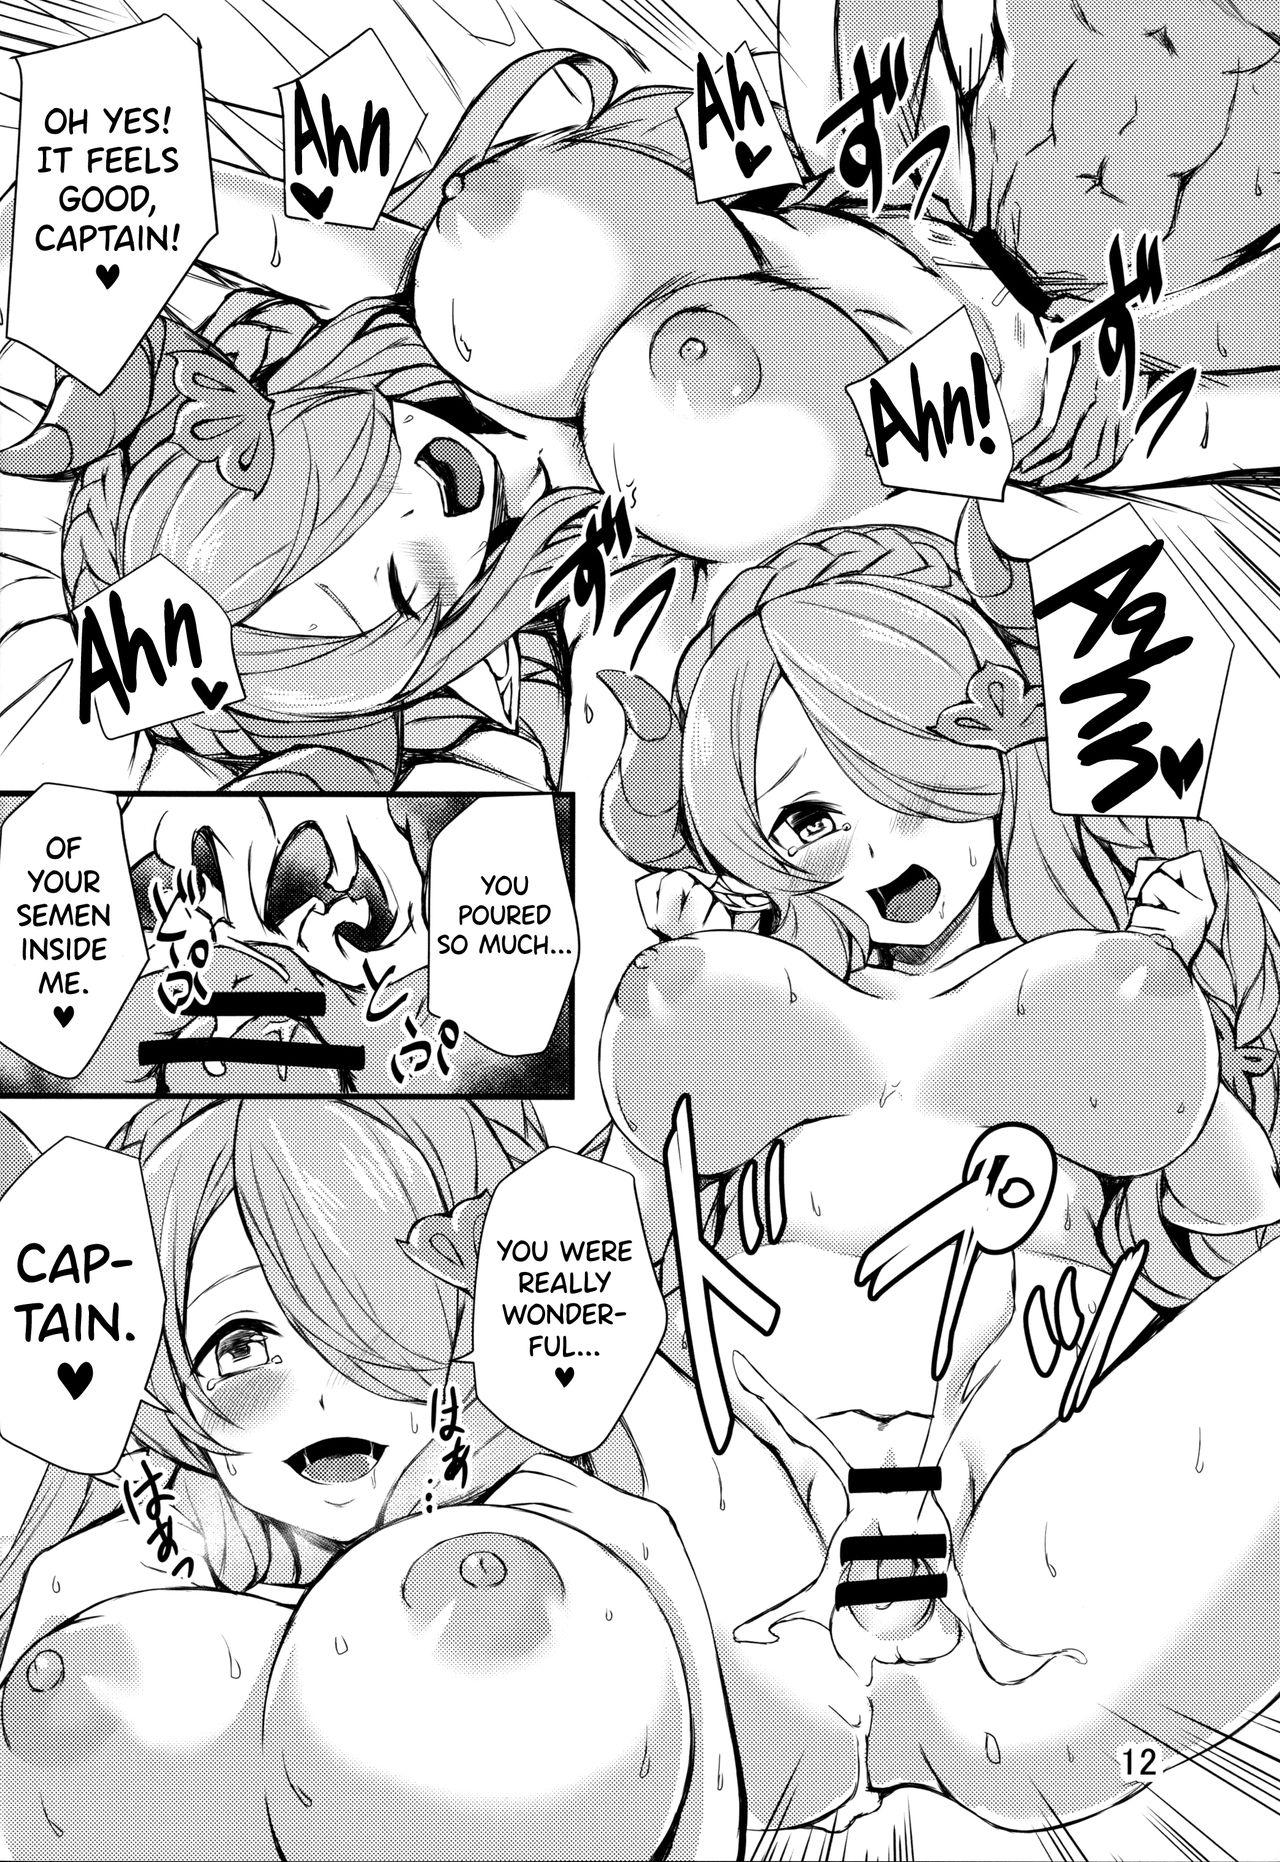 Rico Sleepless Night at the Female Draph's Room - Granblue fantasy Doggystyle Porn - Page 11